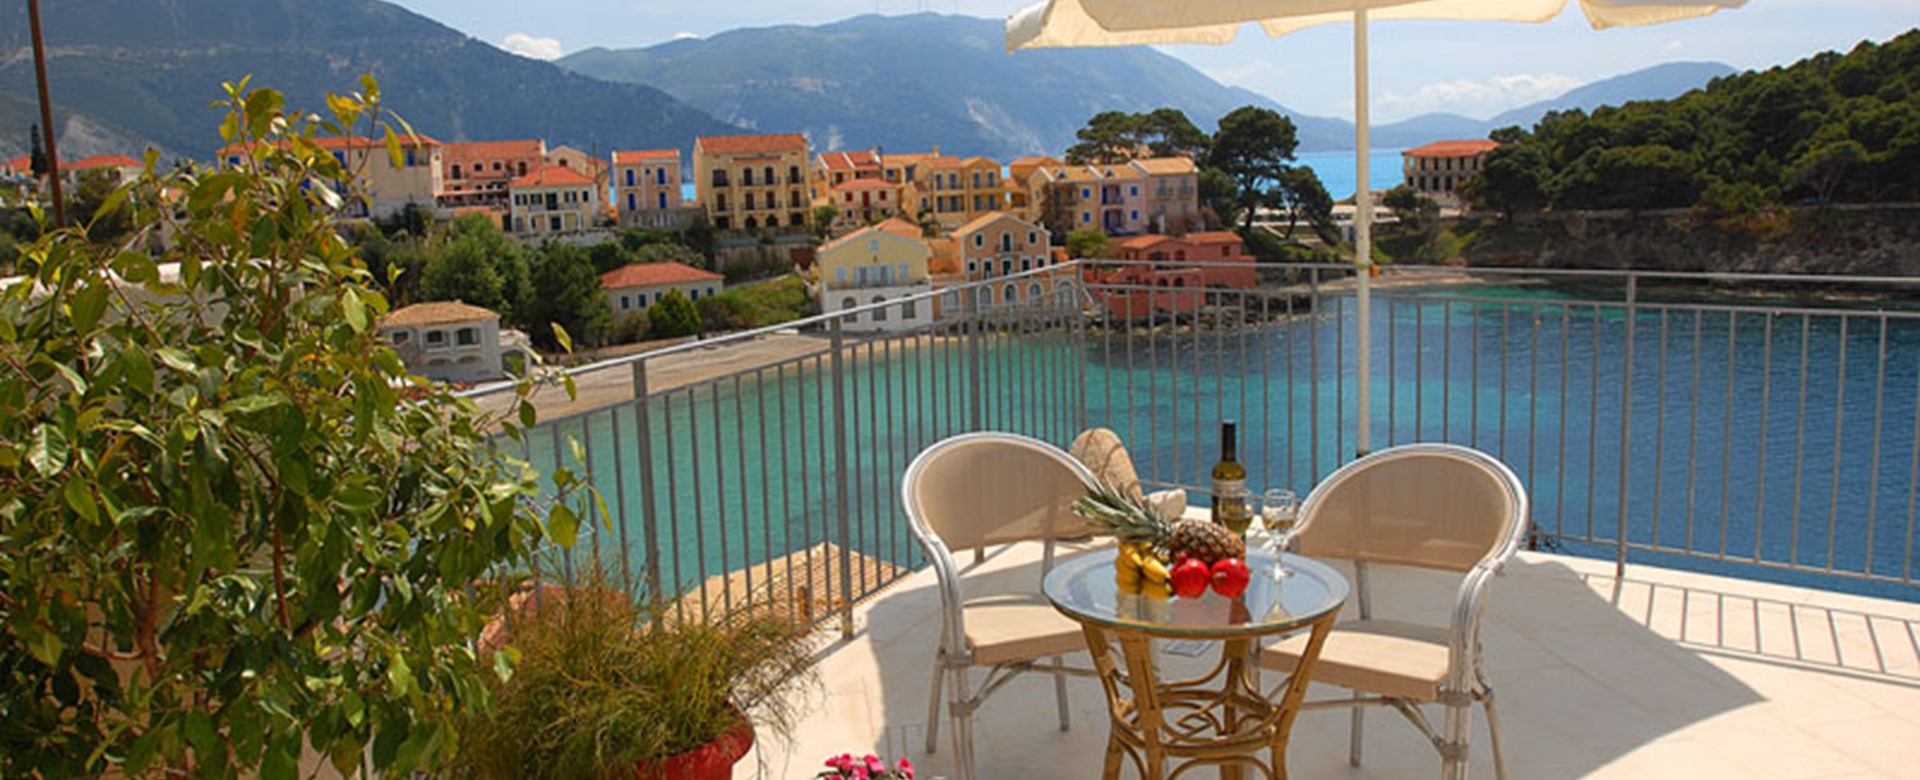 Fruit and wine make the perfect holiday lunch on the terrace outside Villa Panorama, Assos, Kefalonia